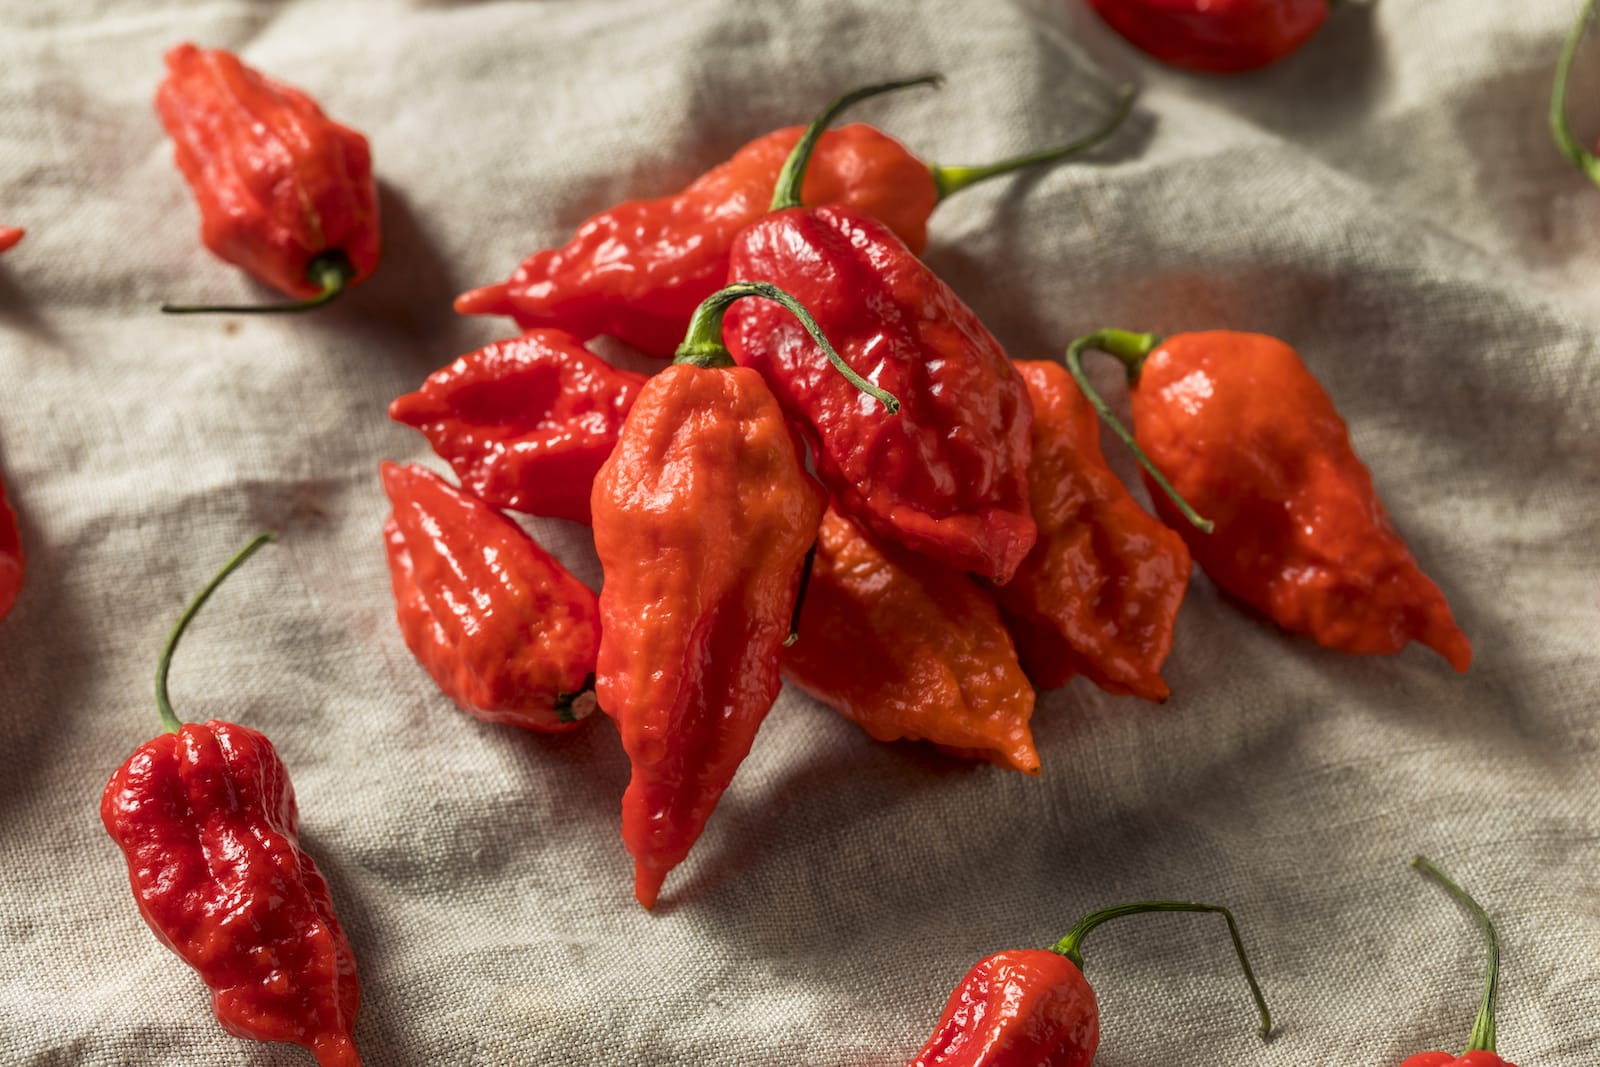 Scoville Scale Chart Ghost Pepper